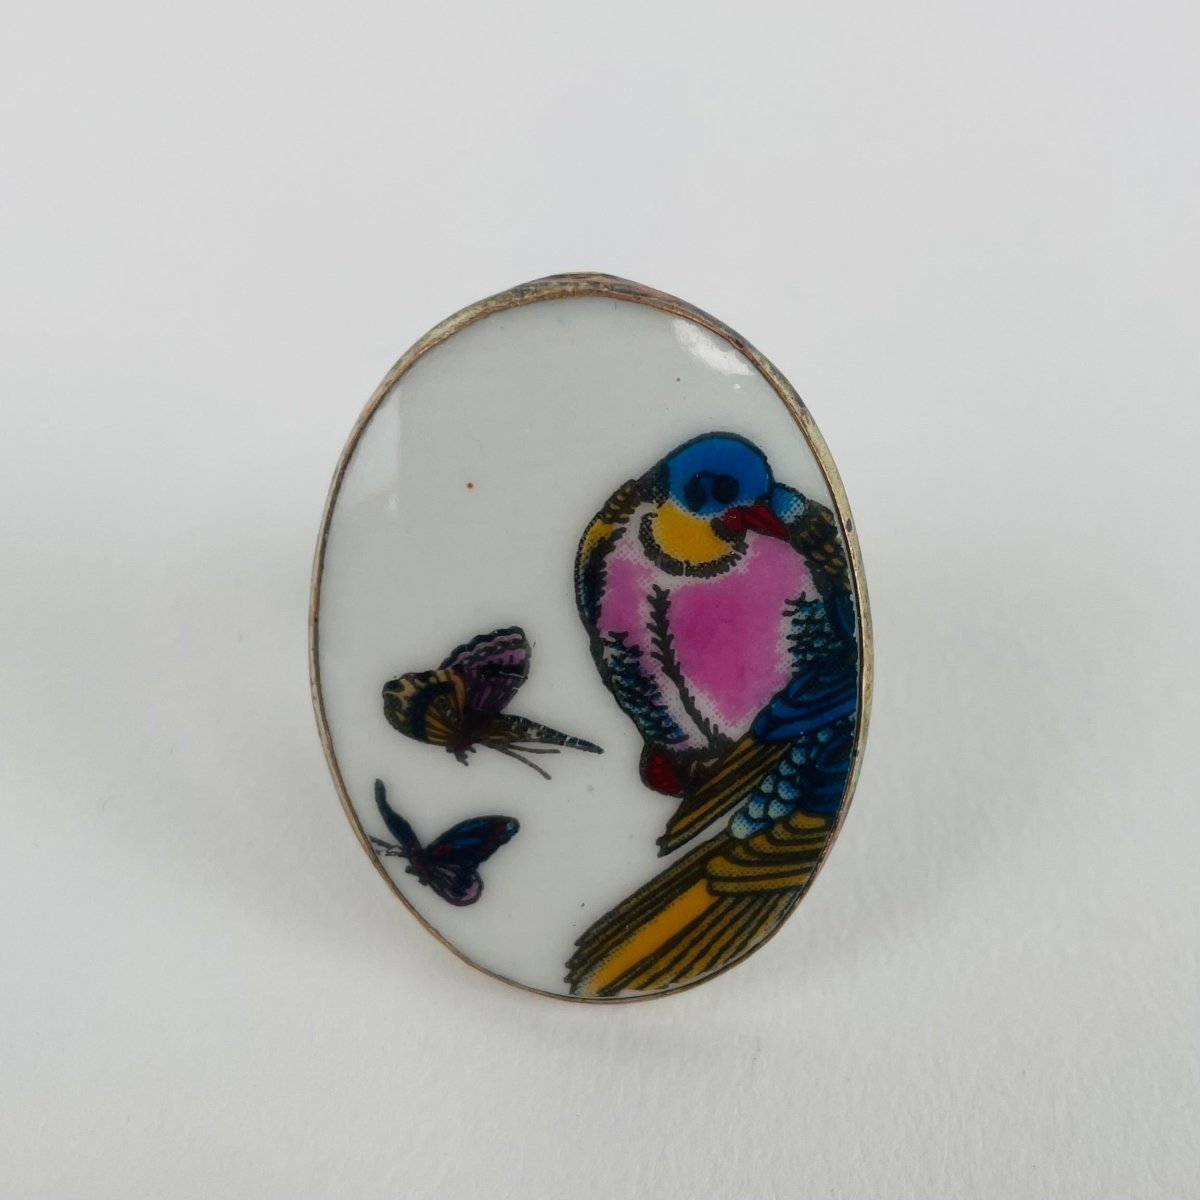 Ceramic Ring with Bird Painting - Hart & Hive